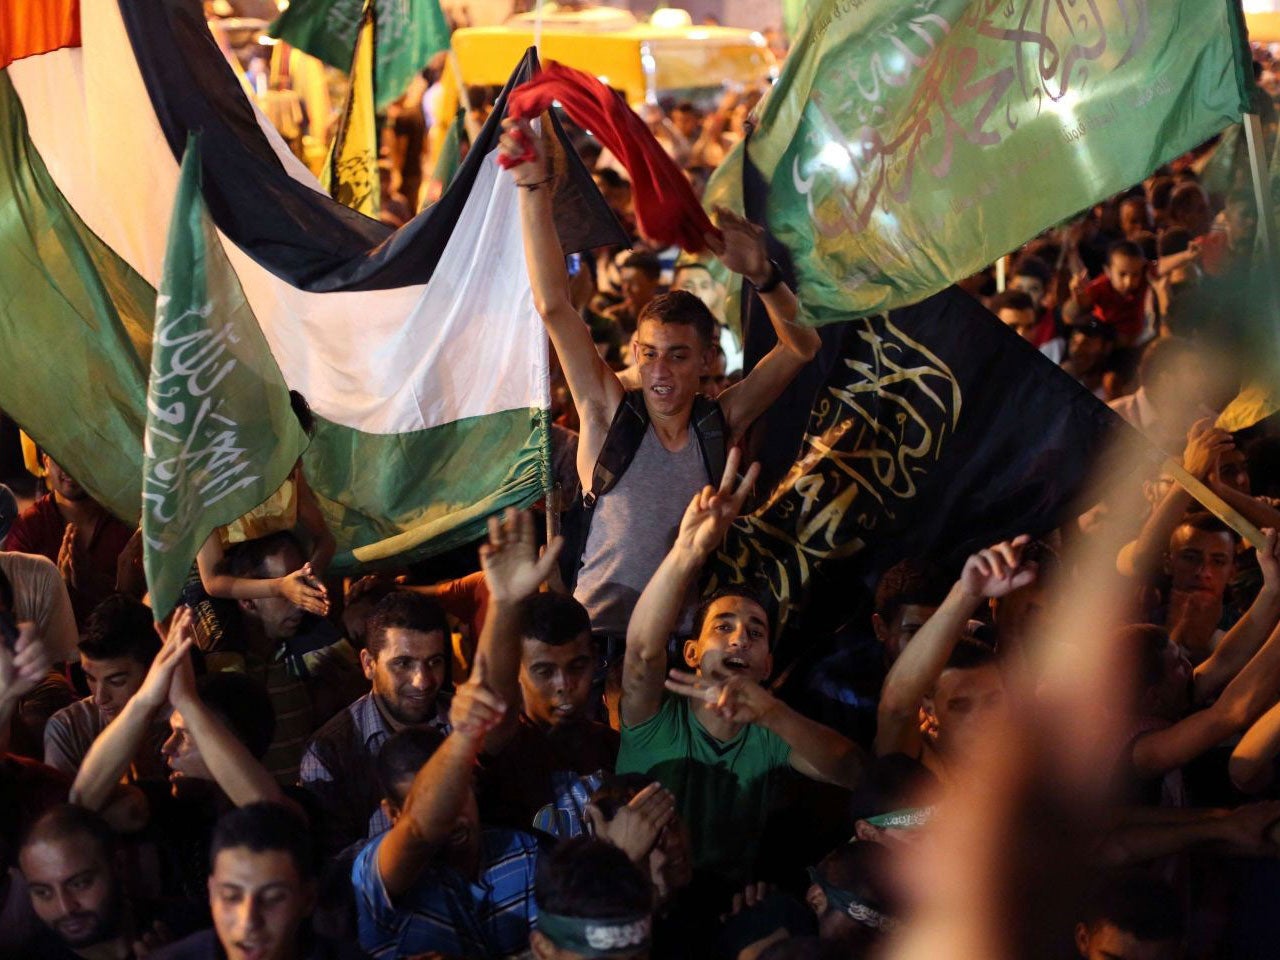 Palestinians celebrate what they said was a victory by Palestinians in Gaza over Israel following a ceasefire, in the West Bank city of Ramallah on August 26